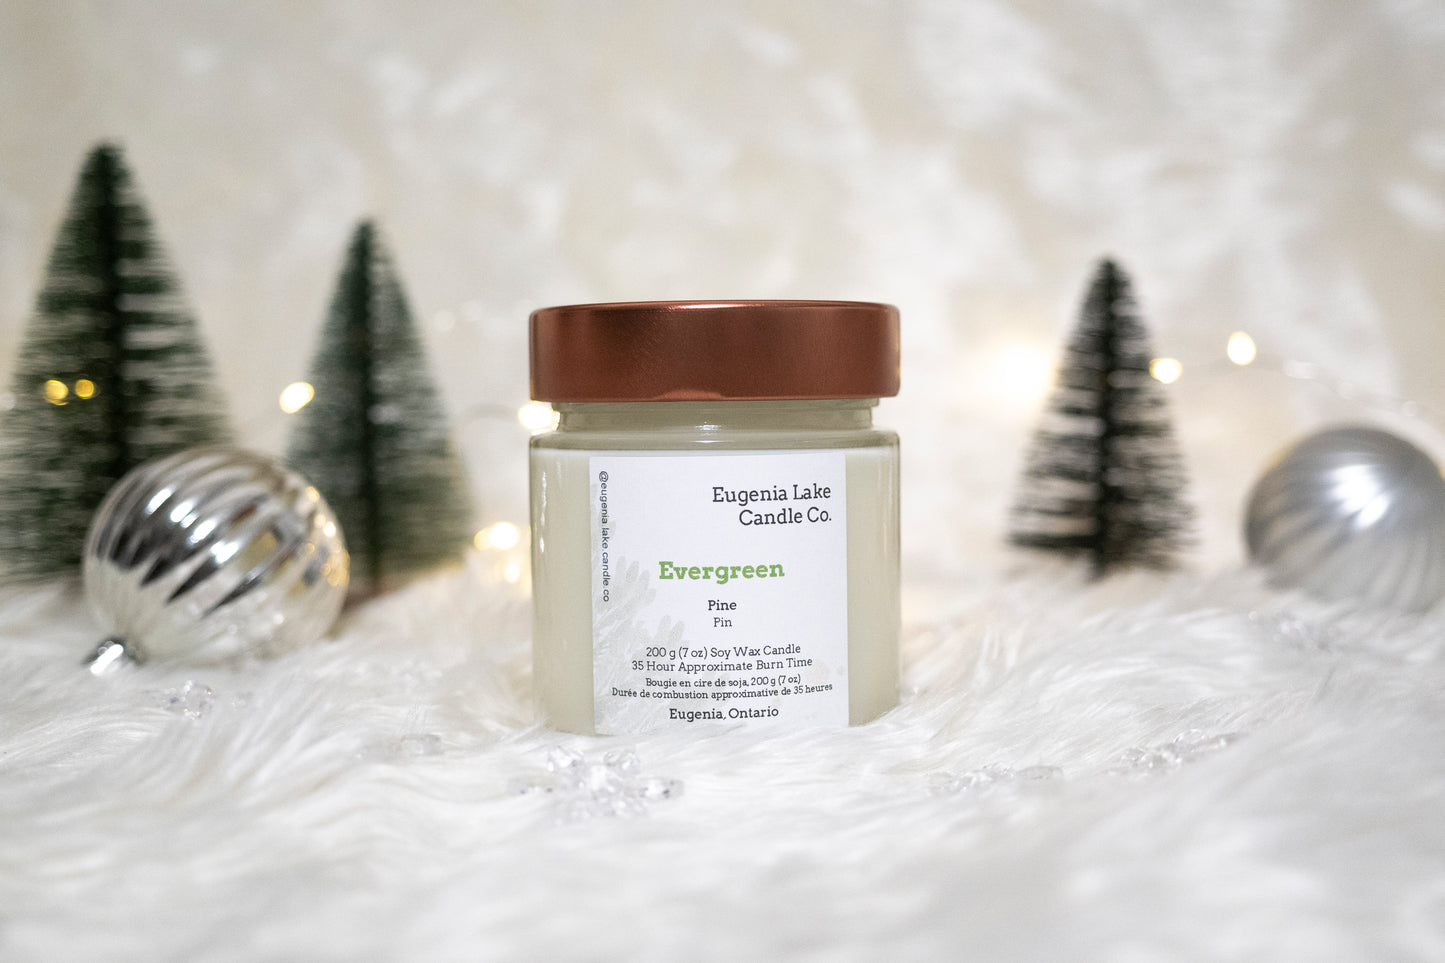 Evergreen Soy Wax Candle